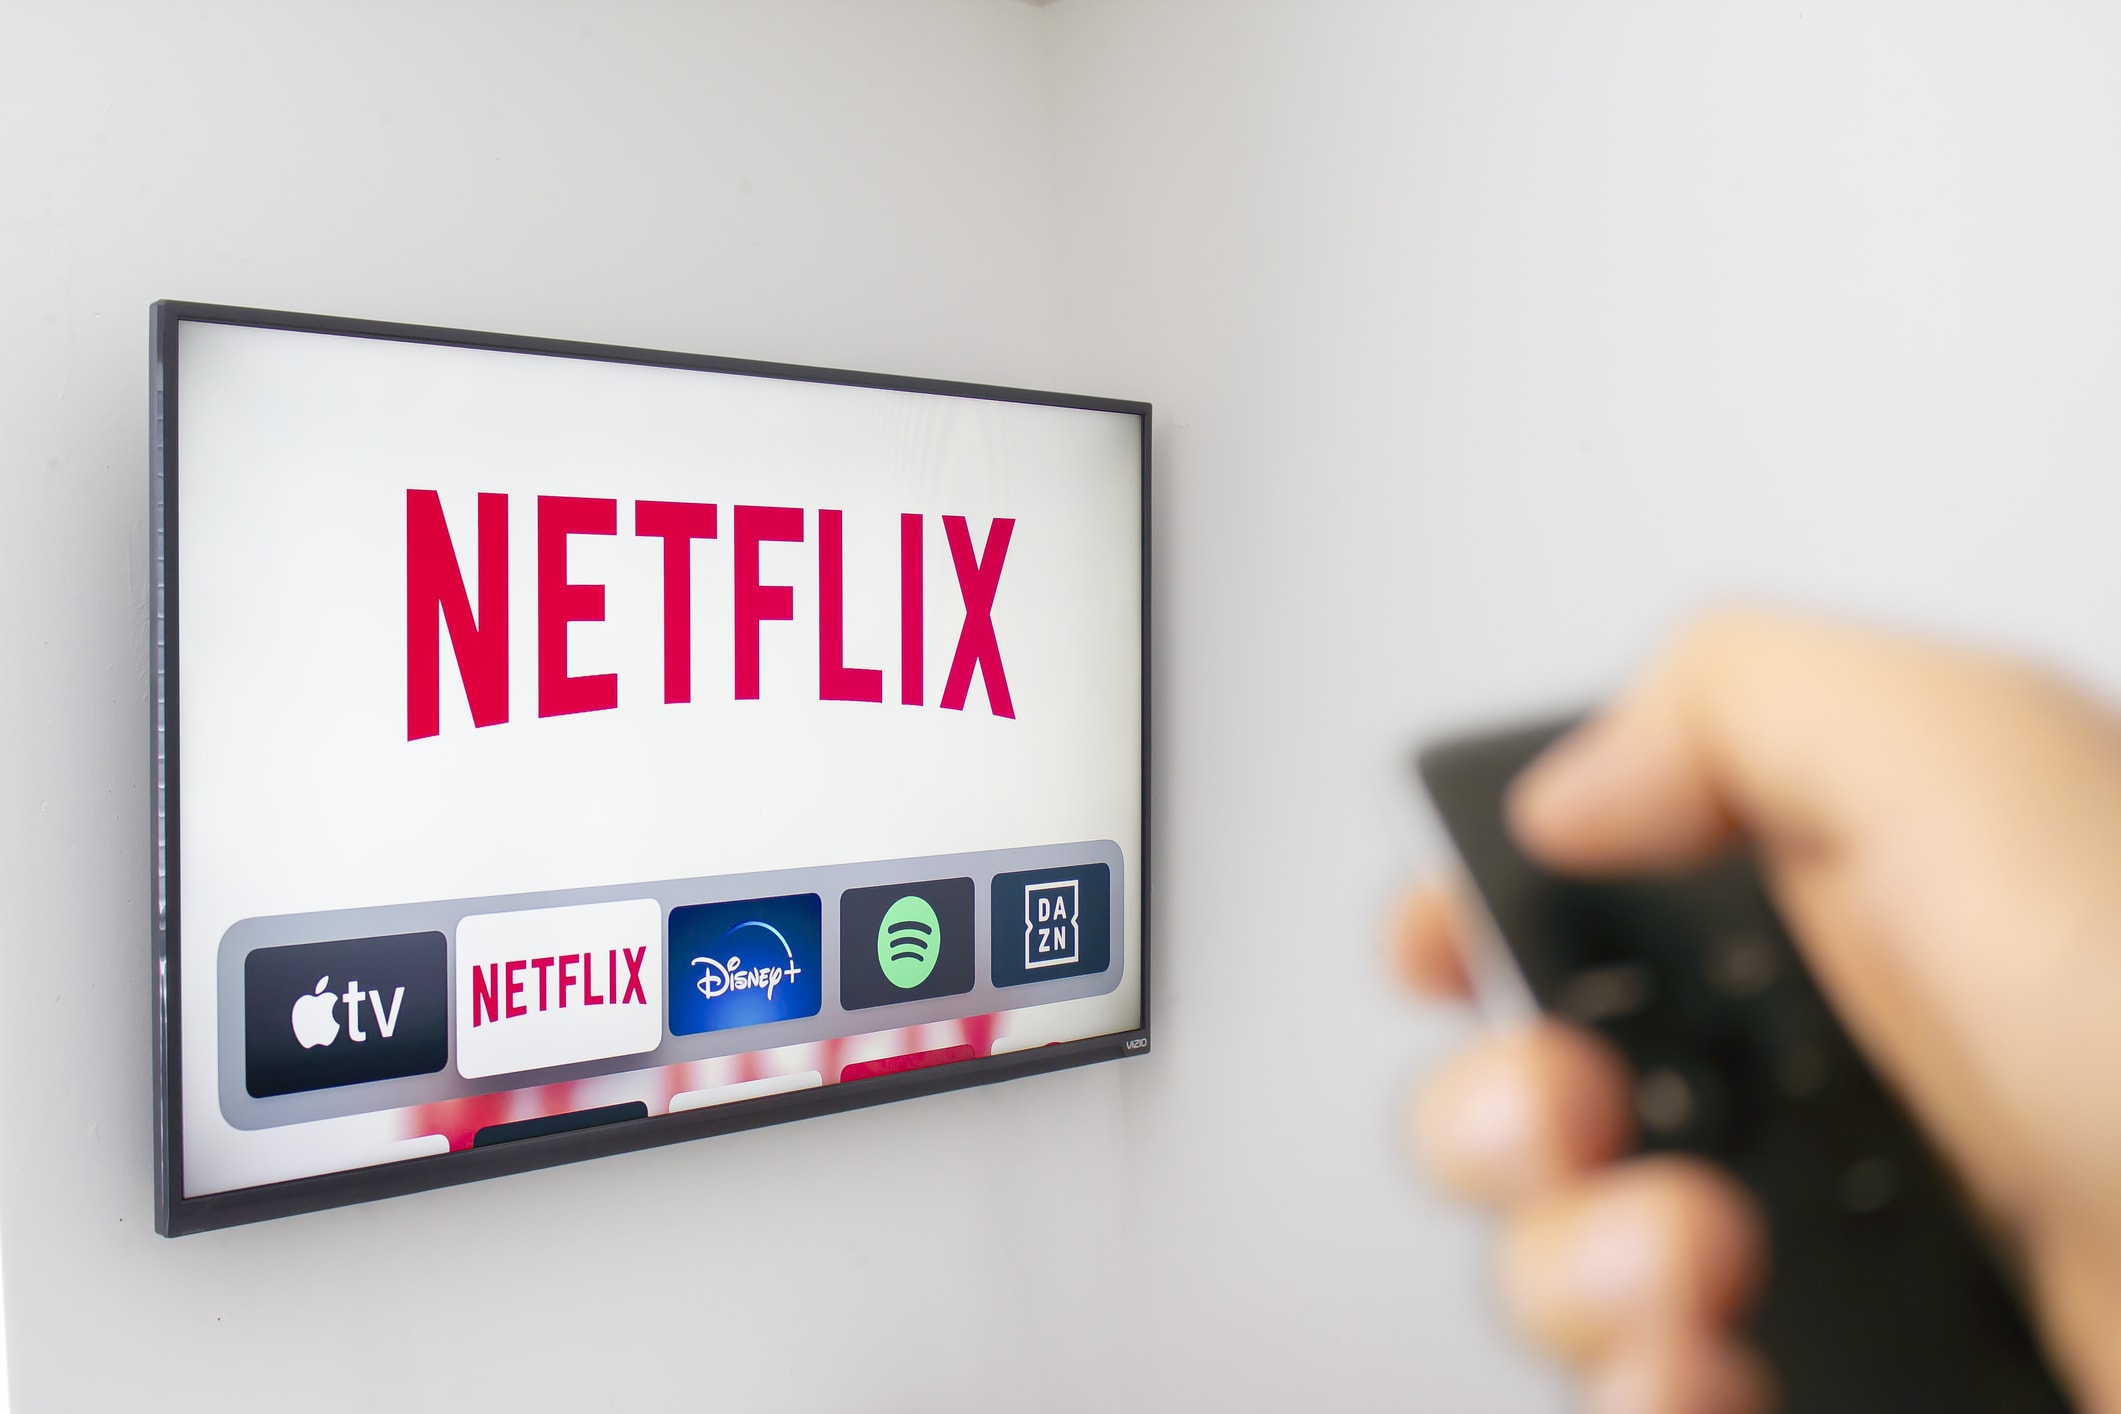 Selecting Netflix app with remote